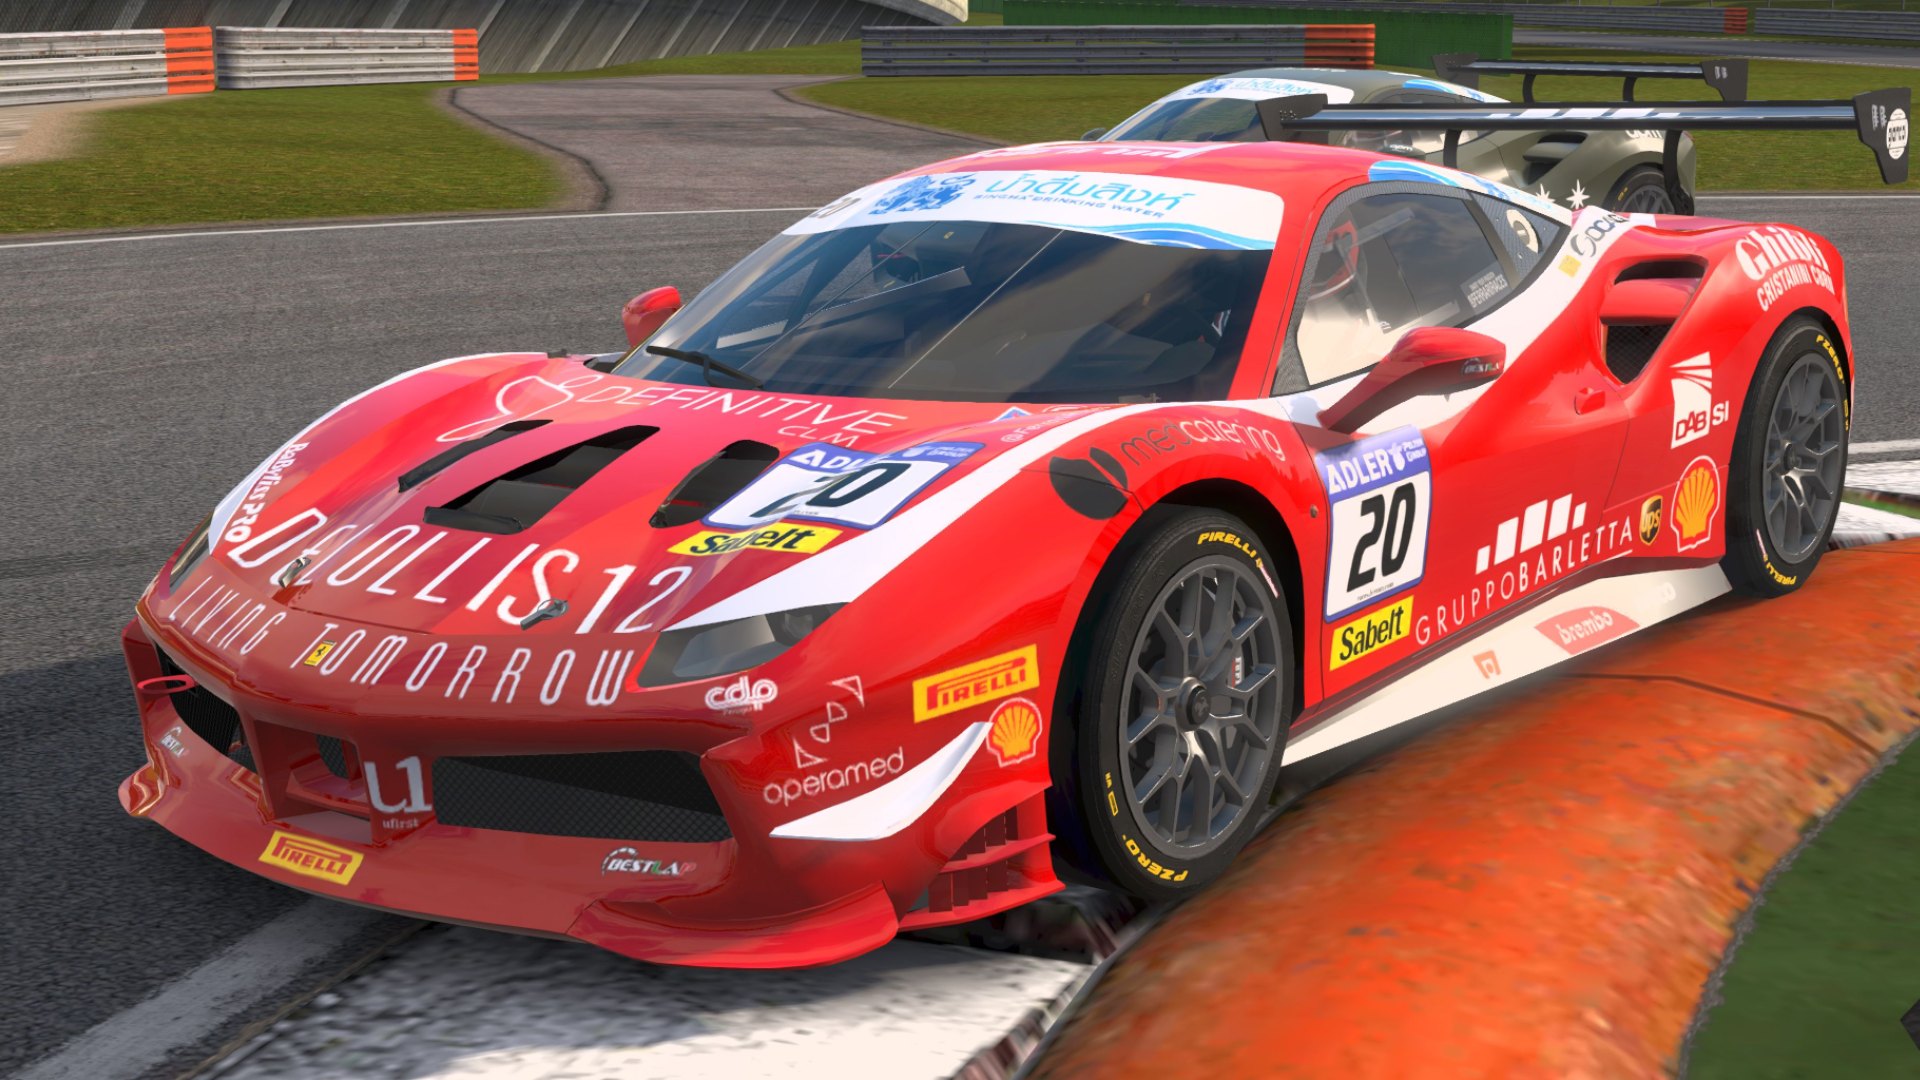 Project Cars Go review – room for more vroom